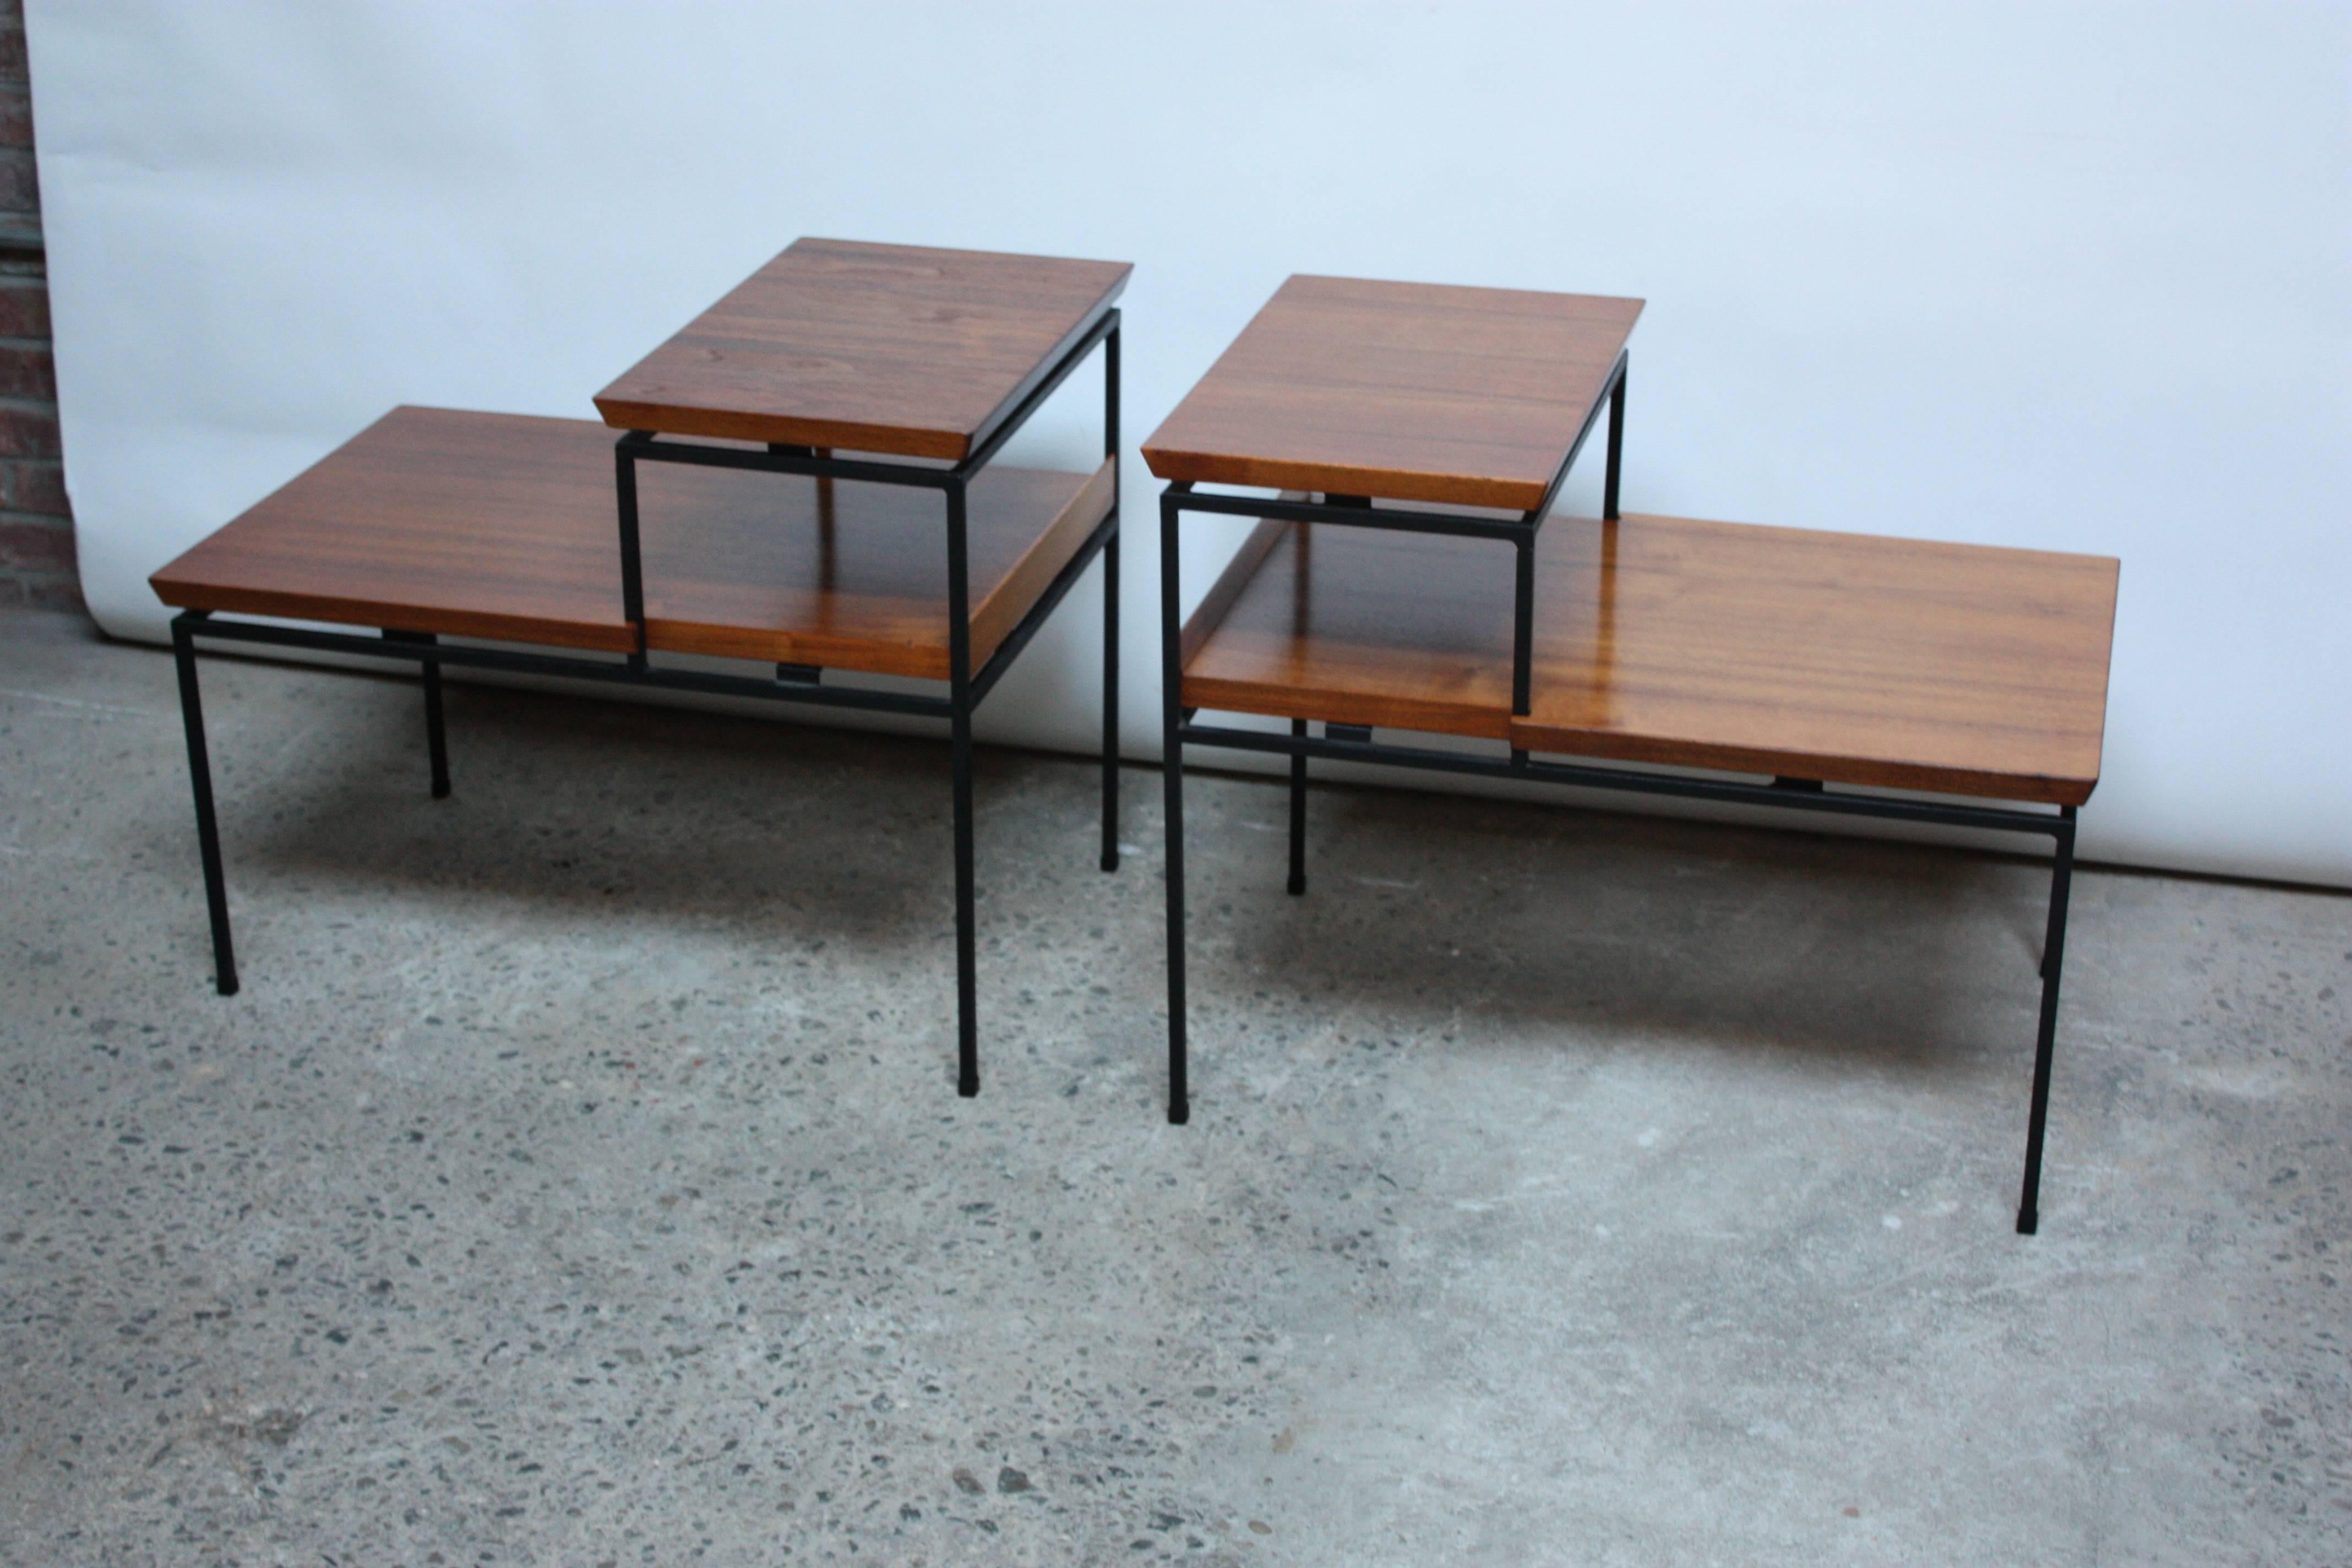 Mid-20th Century Pair of Two-Tier Walnut and Iron Side Tables by Furnwood Corp